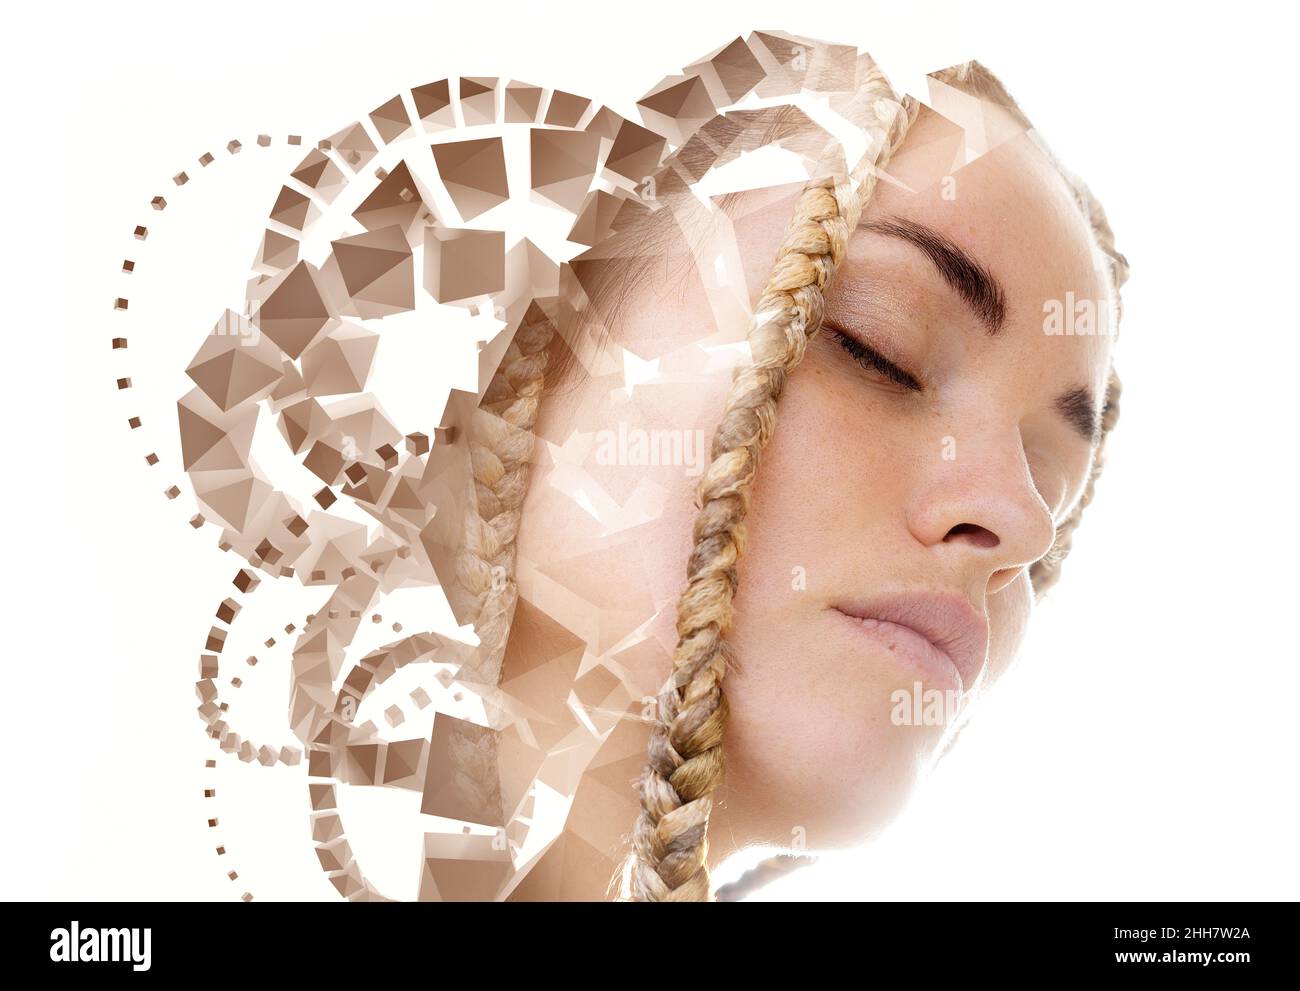 A portrait of a woman combined with 3D polyhedra in a double exposure technique. Stock Photo